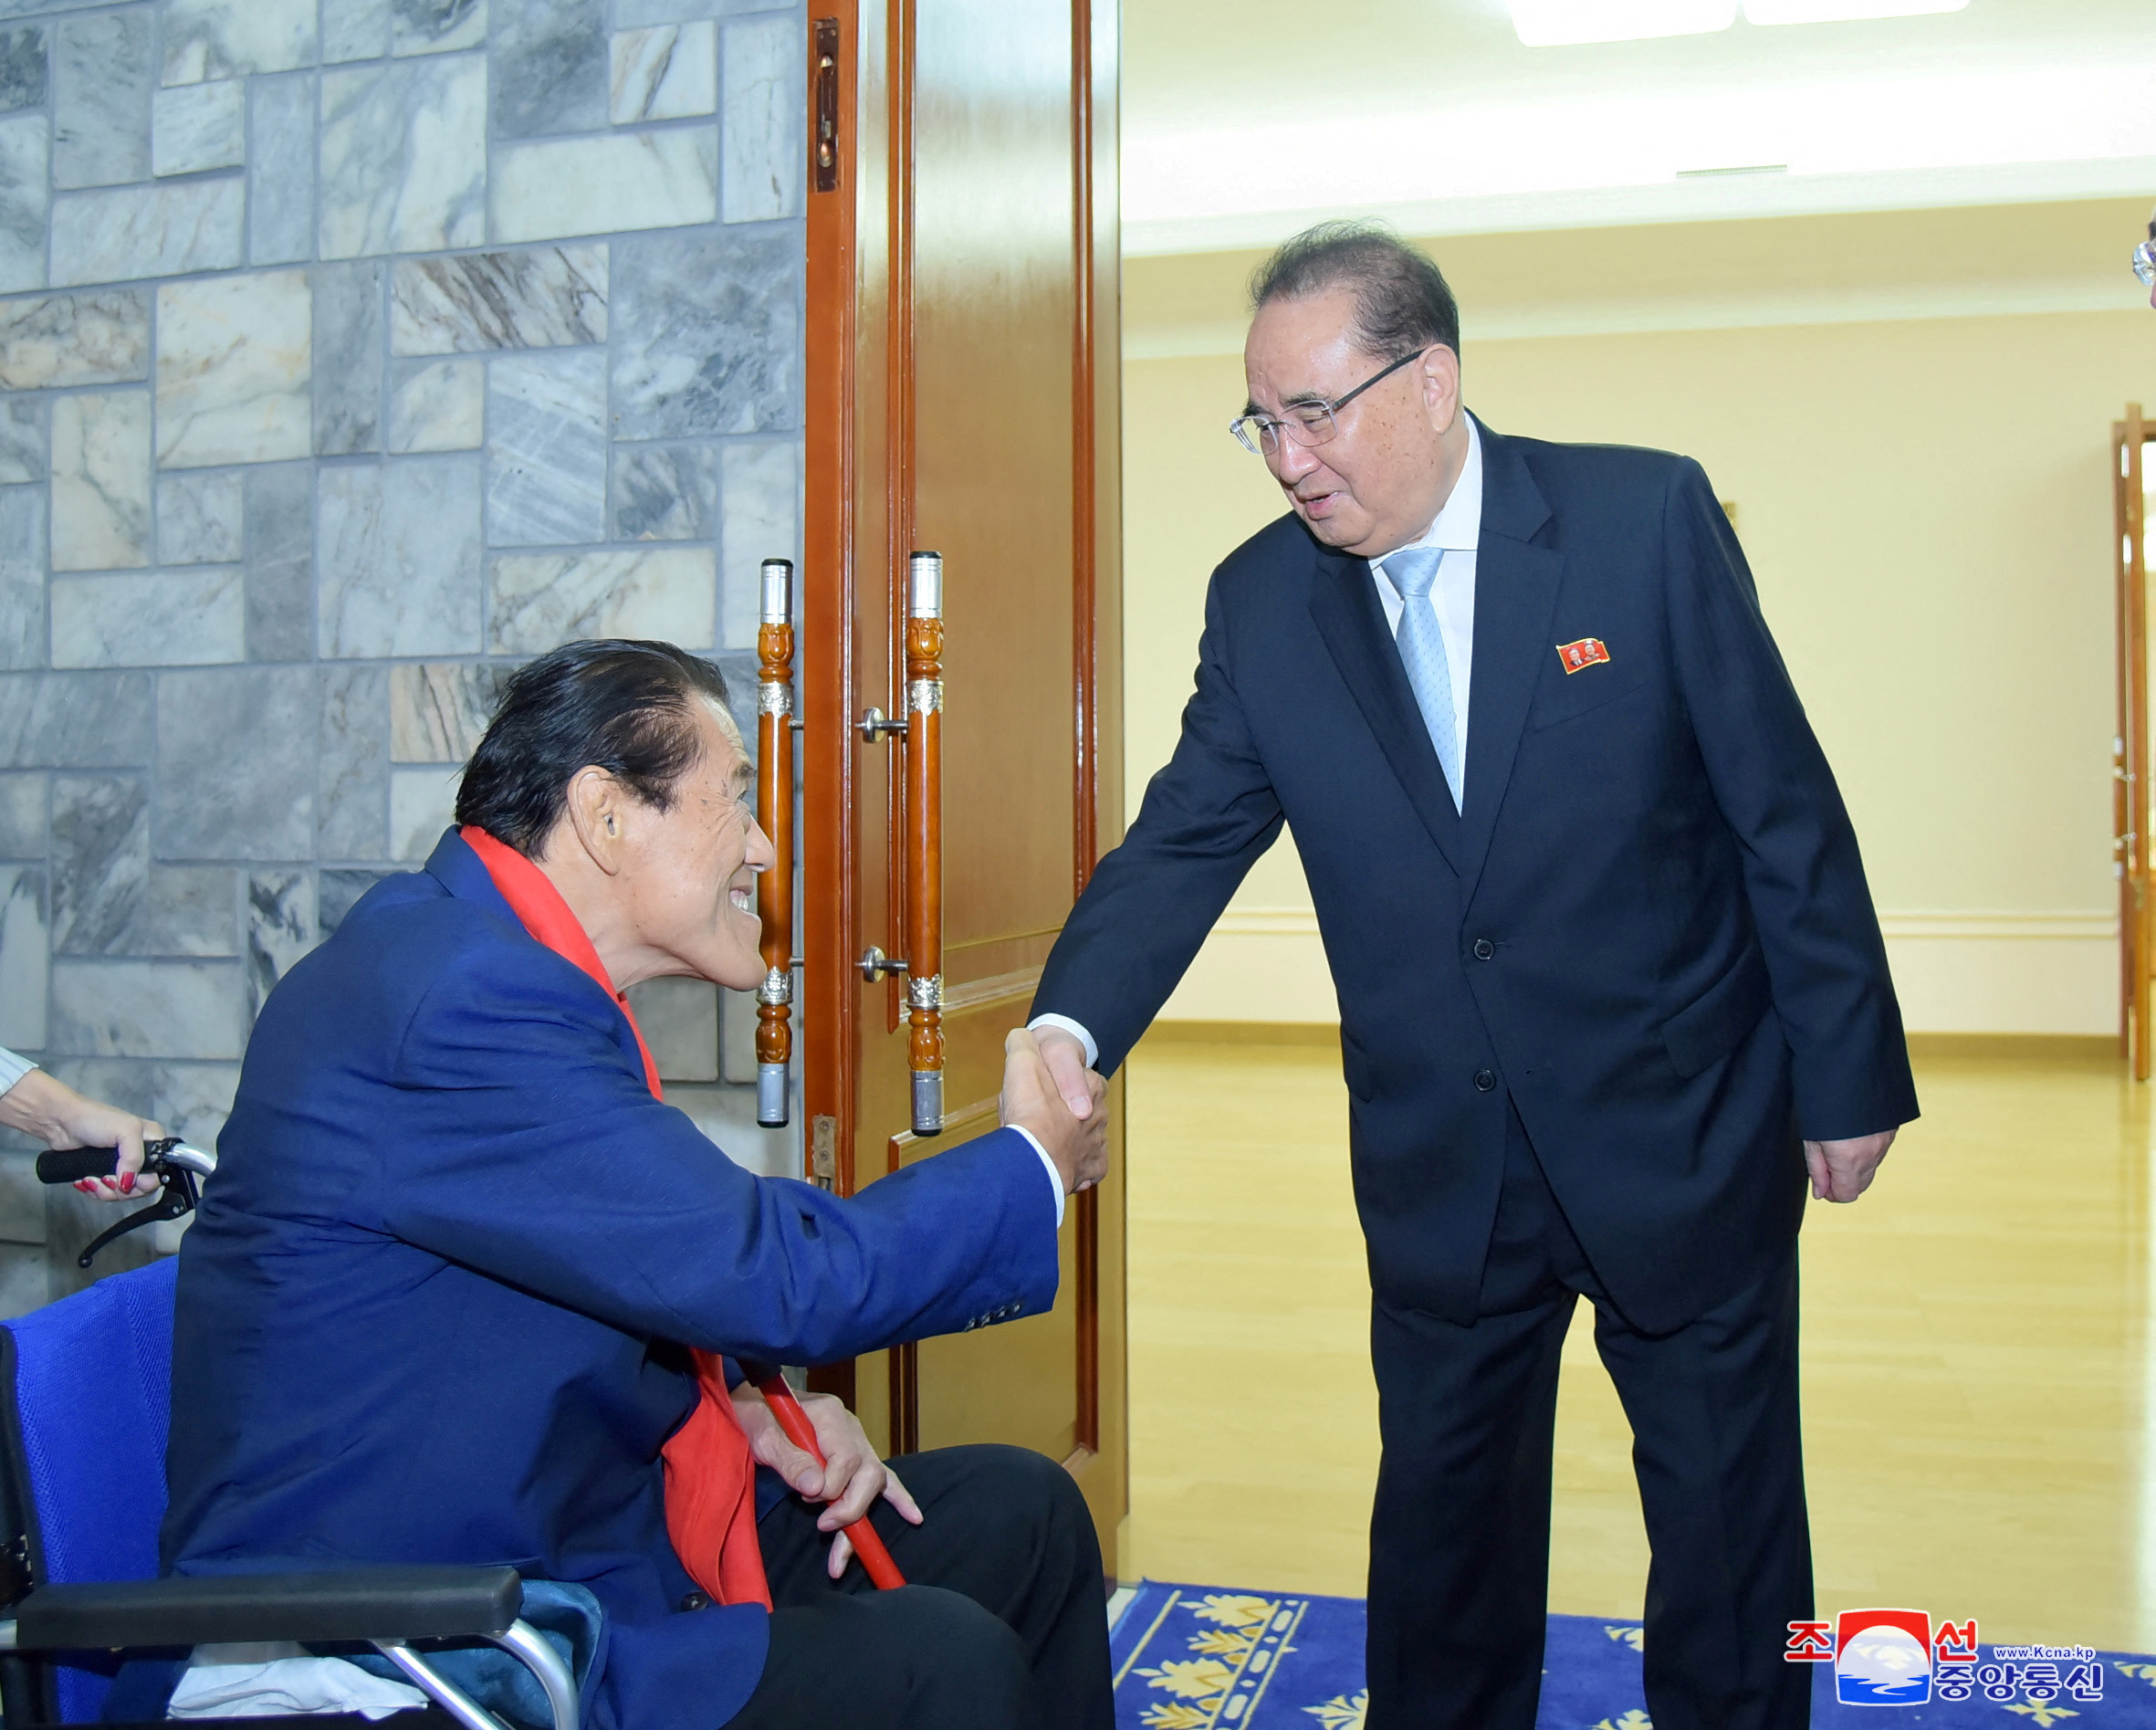 Japanese politician Antonio Inoki (L) shakes hands with a North Korean official in this undated photo released September 15, 2018 by North Koreas Korean Central News Agency. — KCNA via Reuters